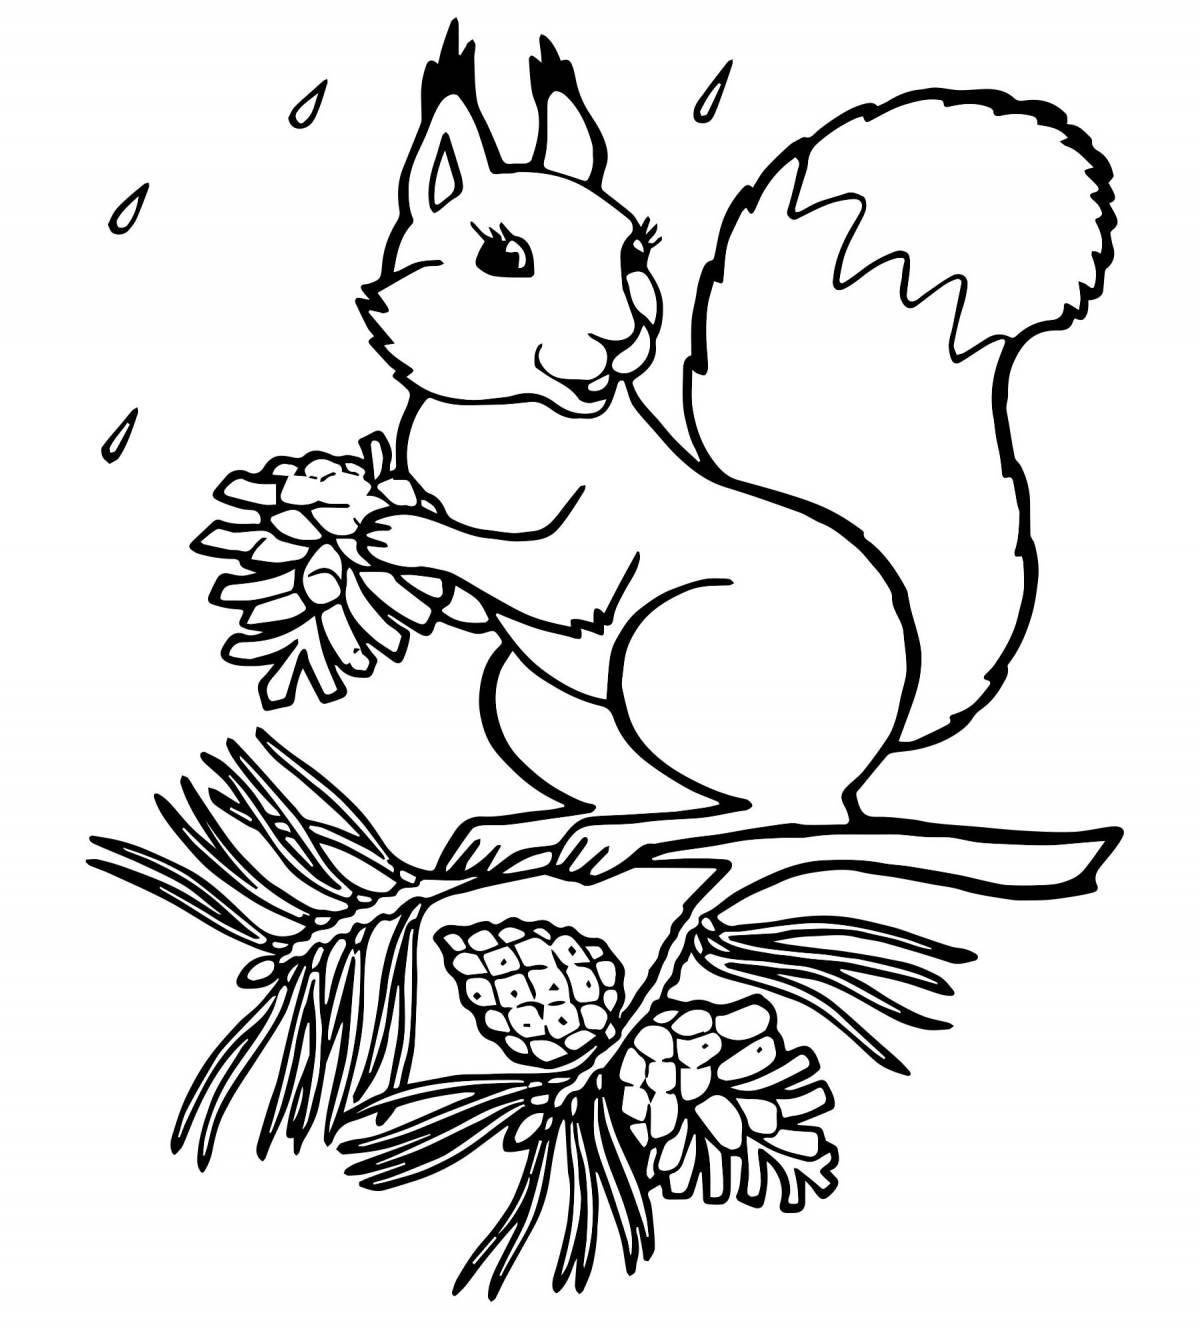 Coloring page festive winter squirrel